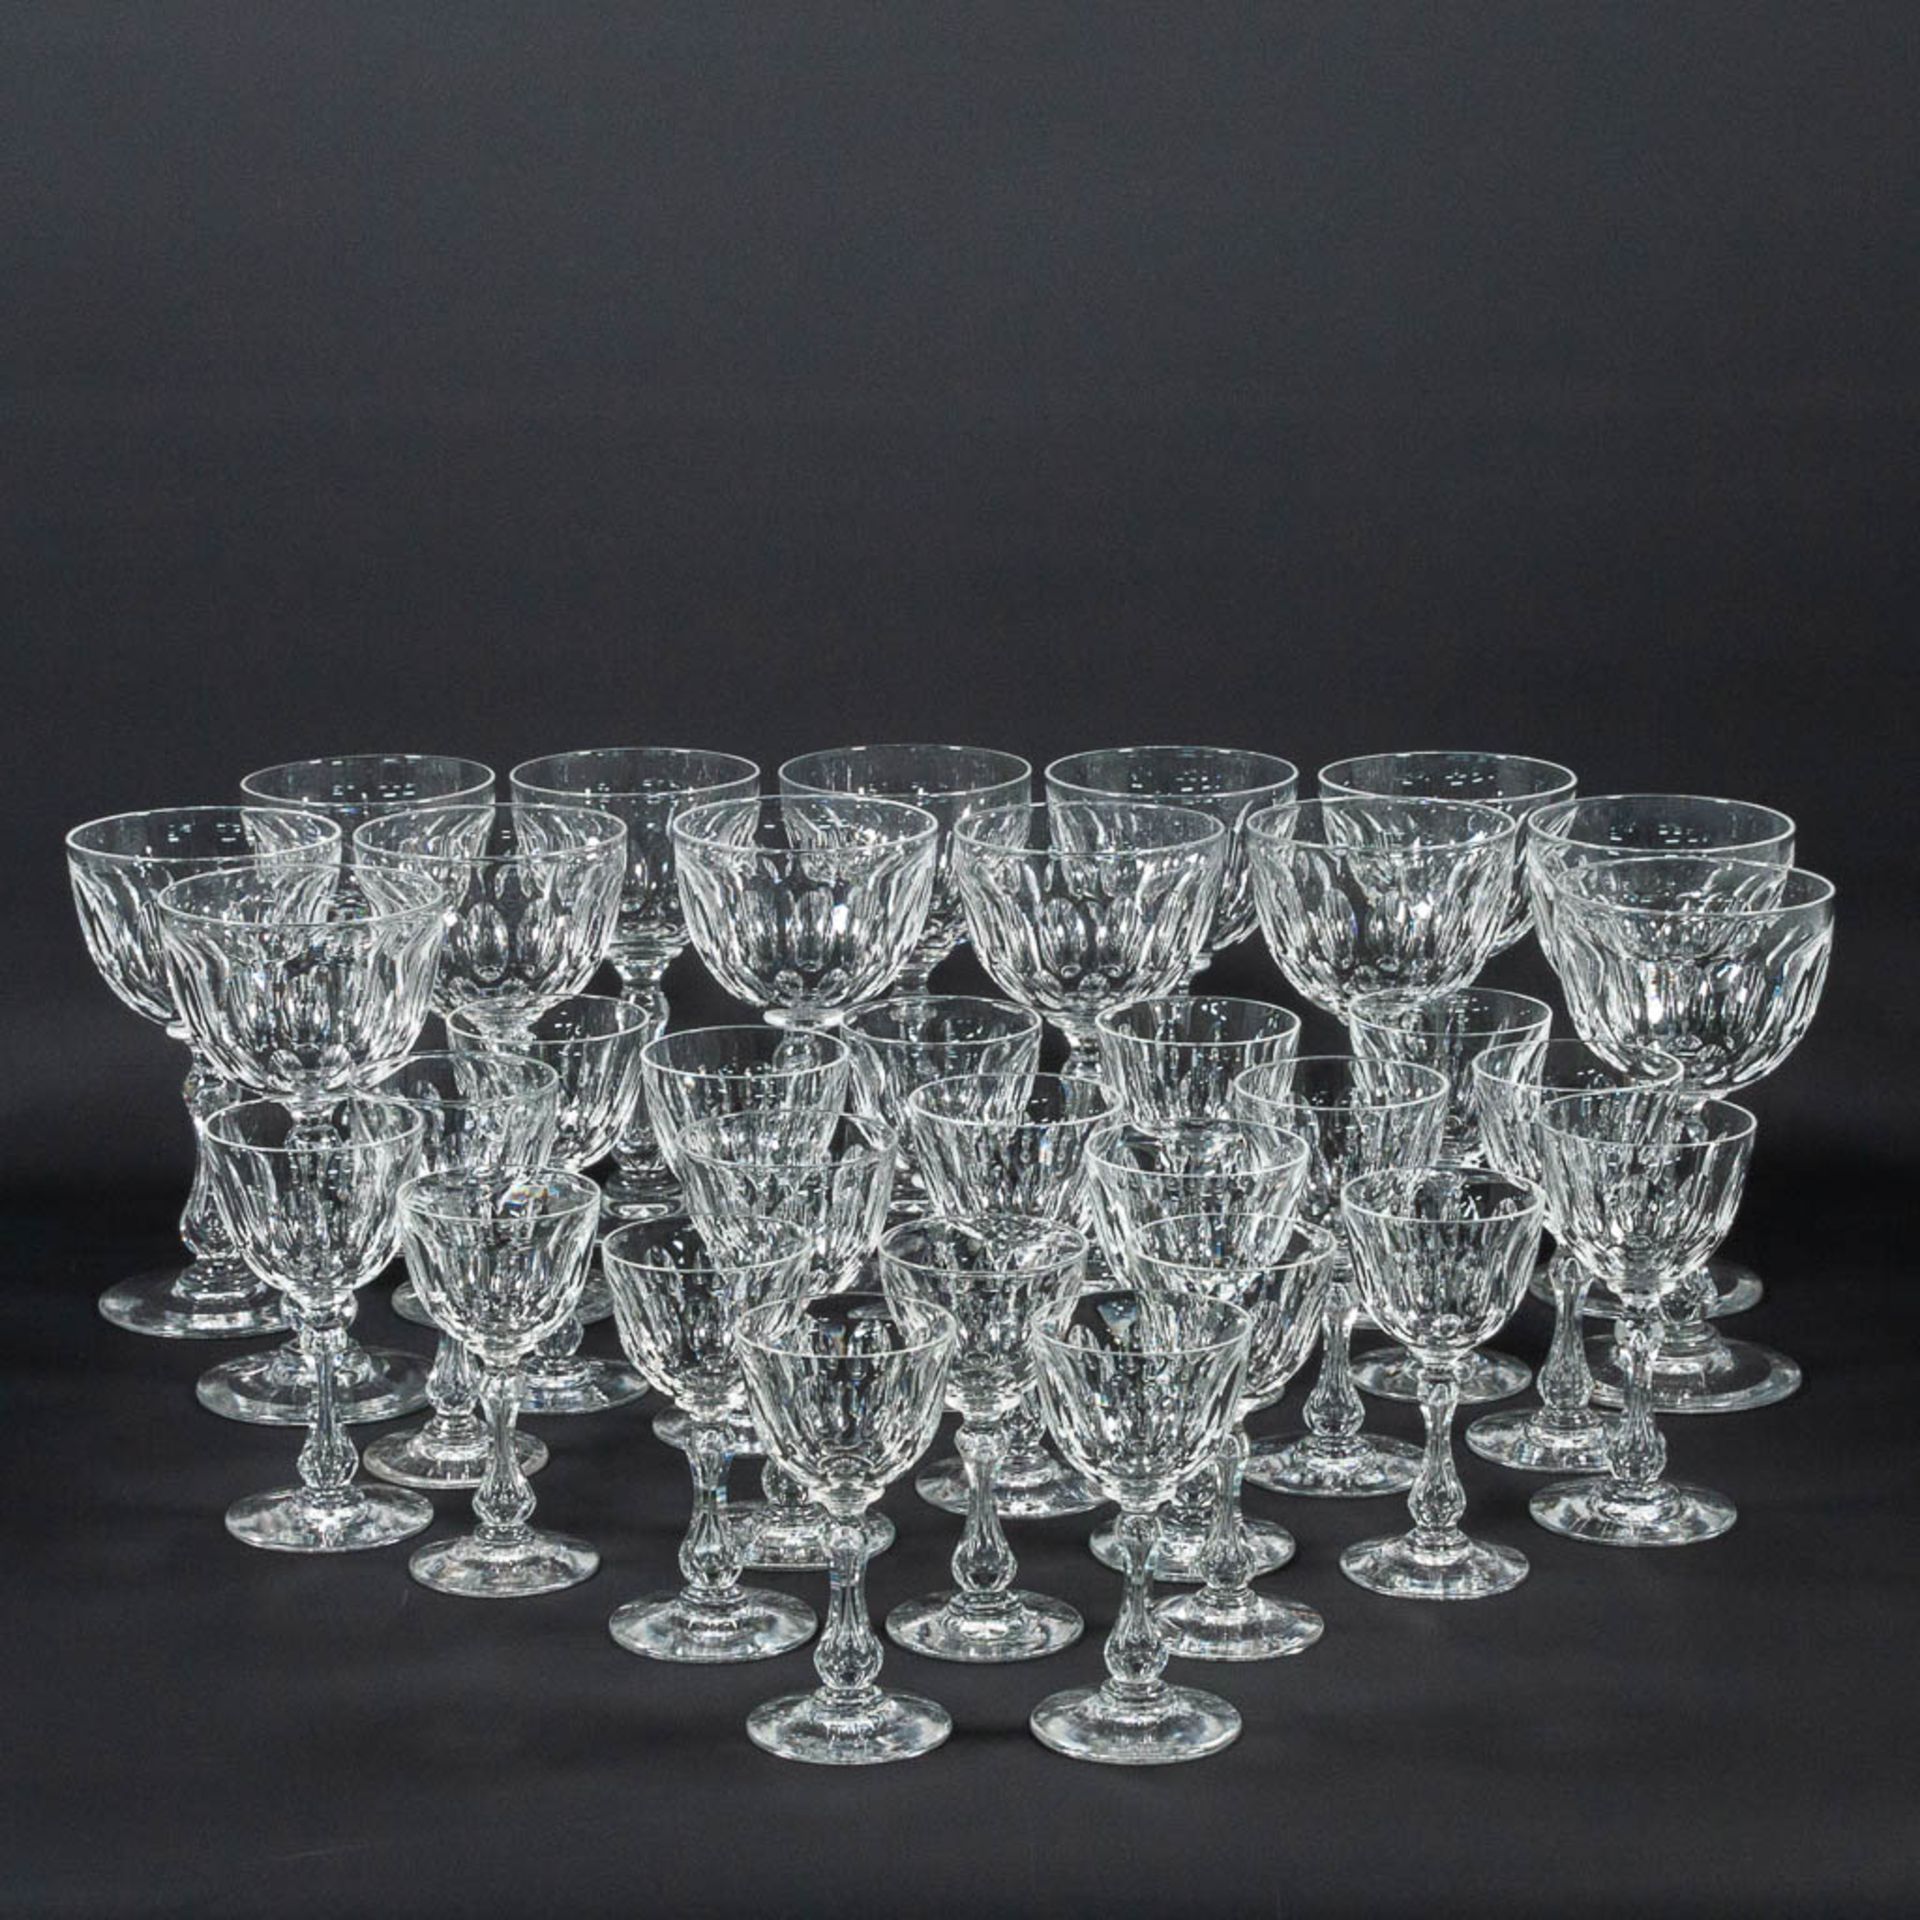 A collection of 34 antique cyrstal glasses with cut sides.